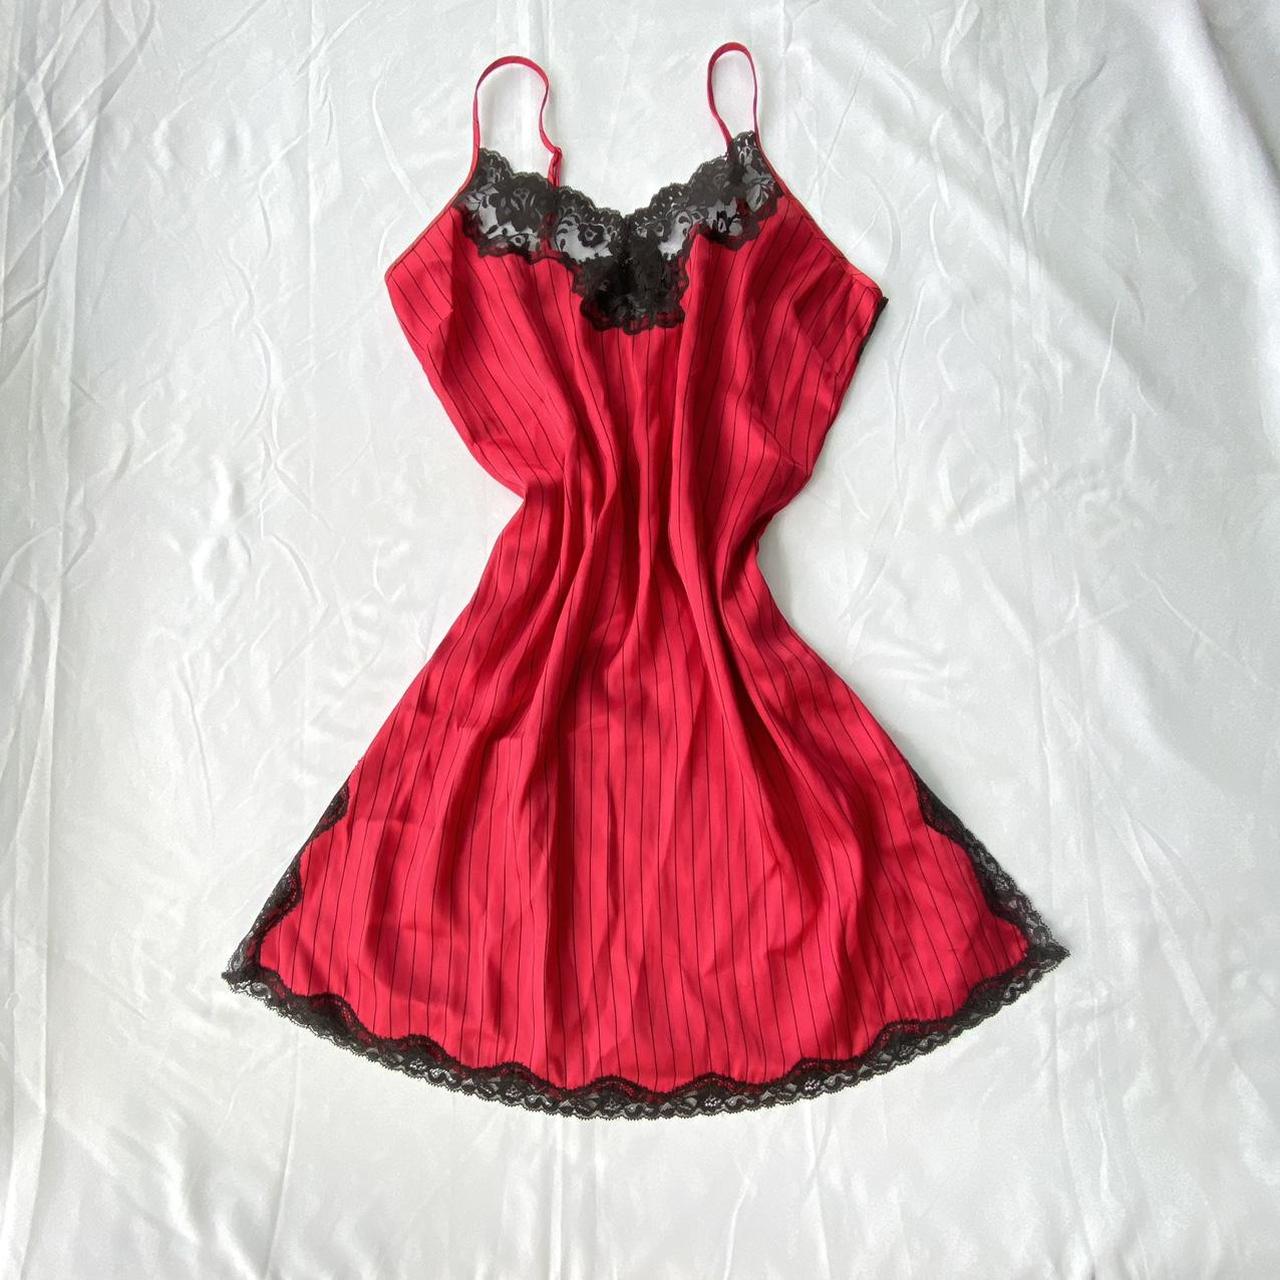 fan outfits account on Twitter  Red slip dress, Vintage red dress